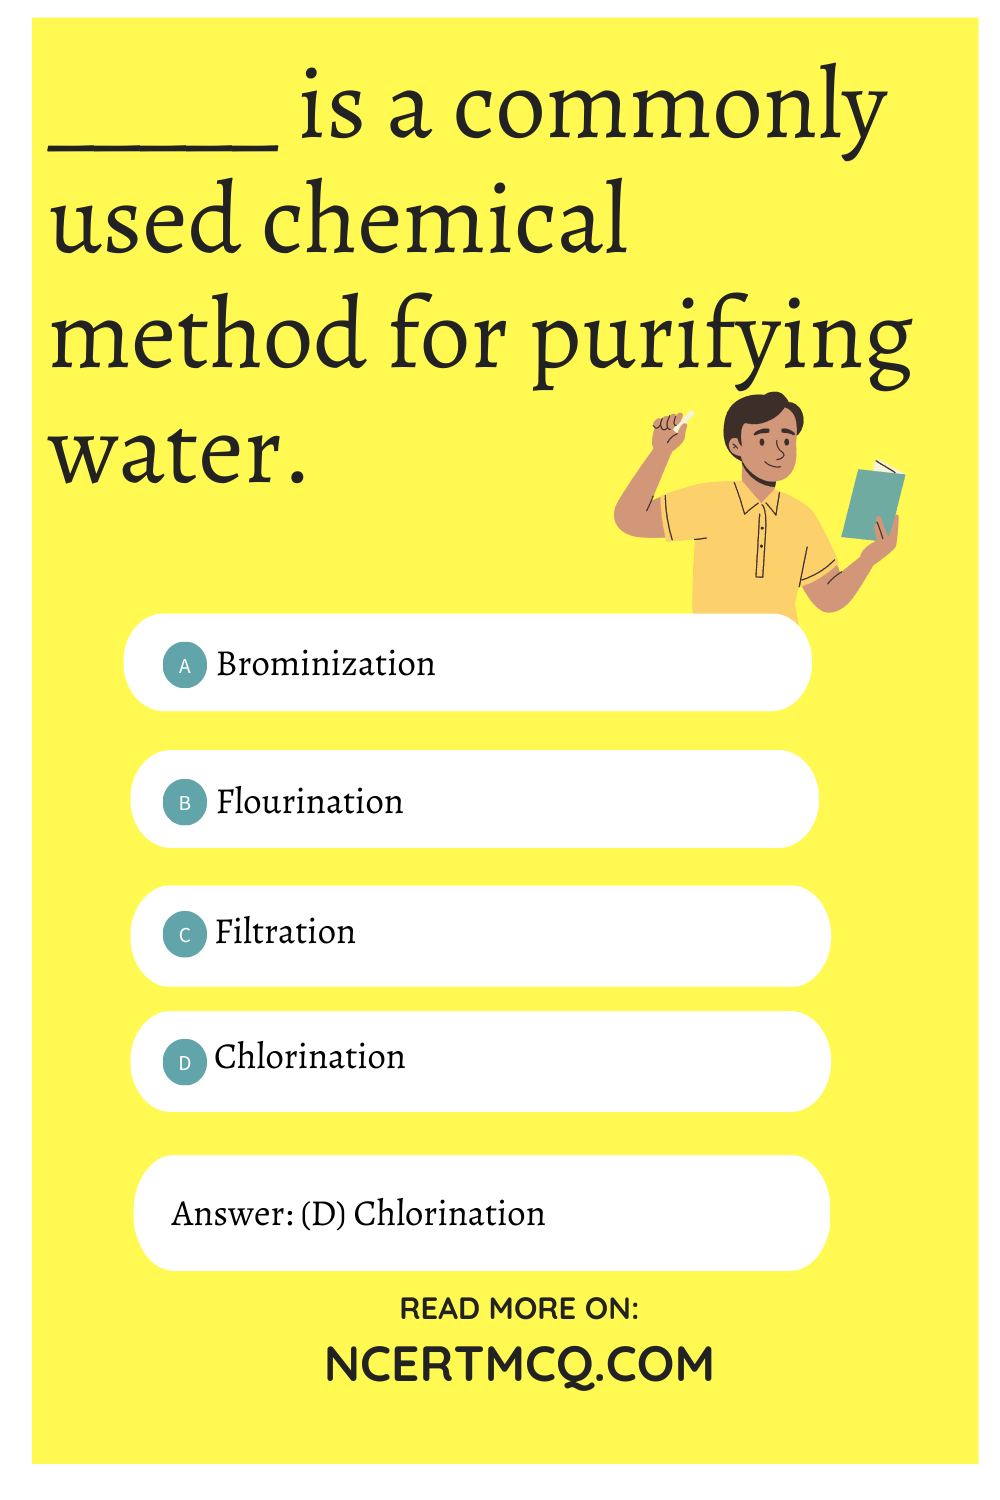 _____ is a commonly used chemical method for purifying water.